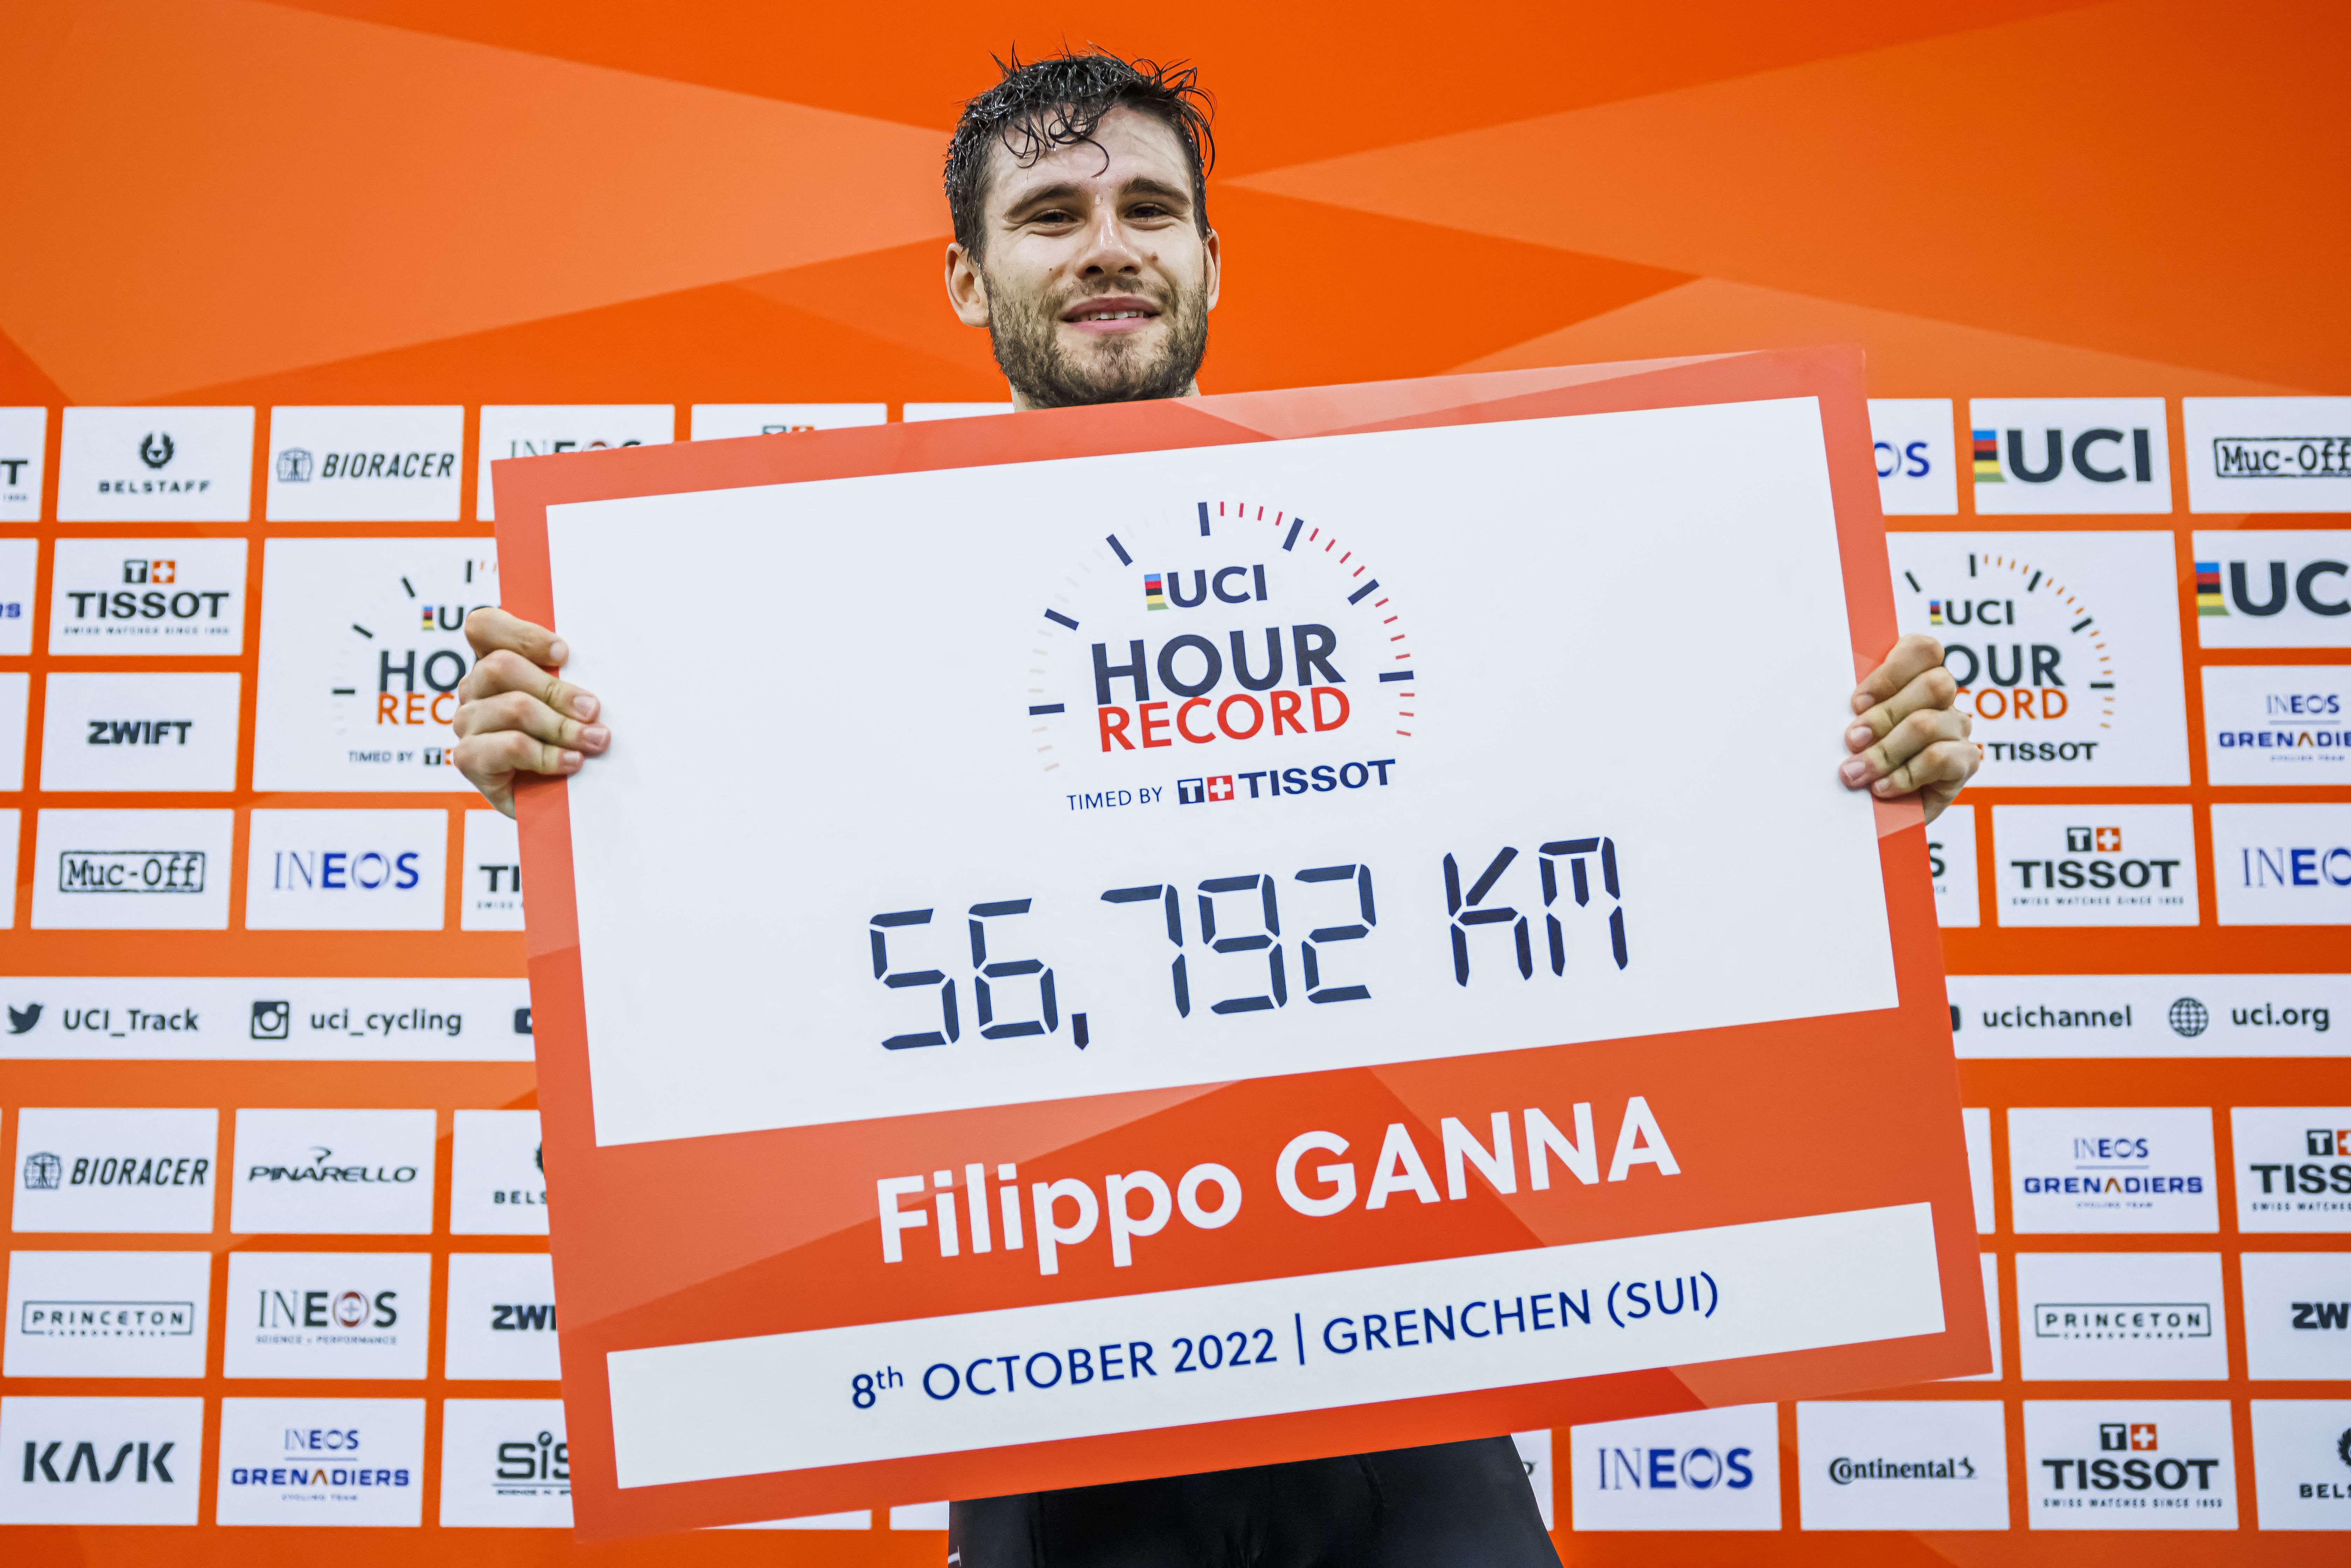 Moving this record into a new era!' – Filippo Ganna smashes Hour